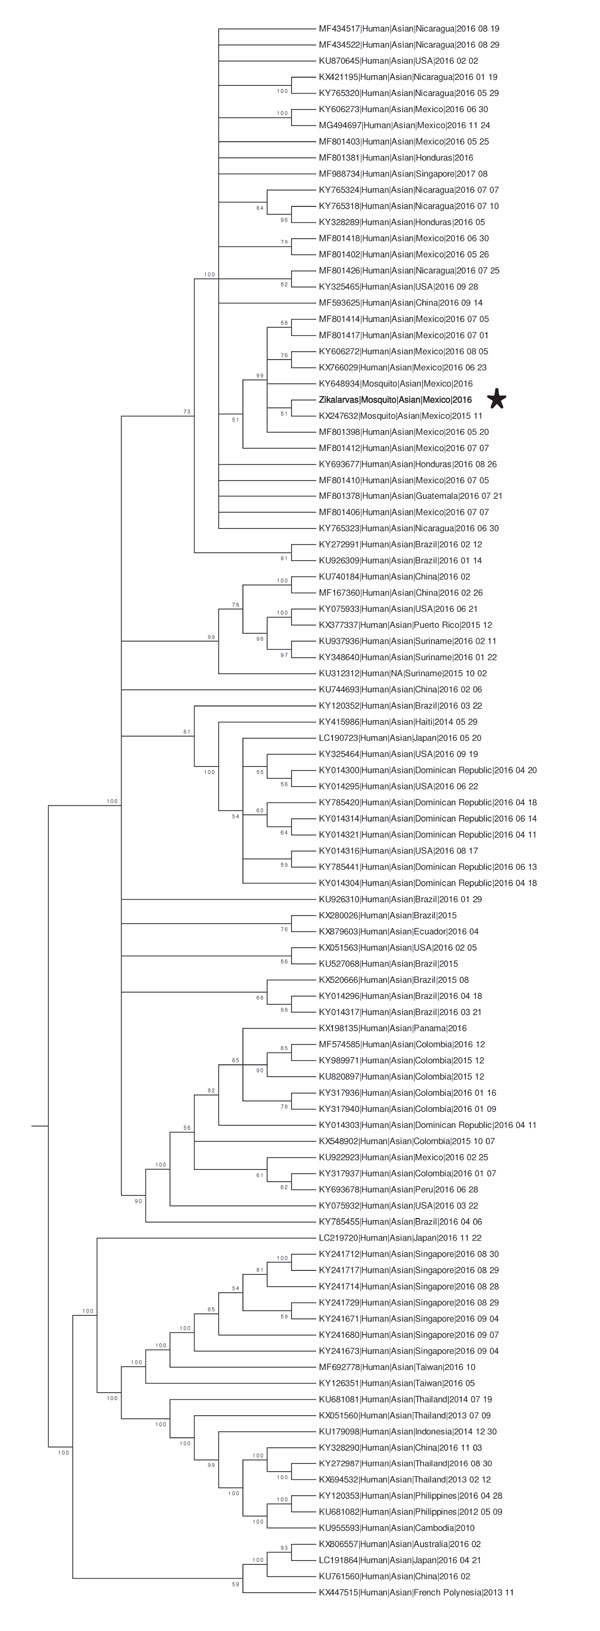 Condensed phylogenetic reconstruction of selected complete Zika virus genomes. This tree depicts the phylogenetic relationships between Zika virus isolate 31N from an Aedes aegypti larval pool, Jojutla, Morelos, Mexico (bold), and 98 complete genome sequences of Zika viruses obtained from the Virus Pathogen Resource database. GenBank accession numbers are provided. Nodes with bootstrap values support &lt;50% were condensed and branch lengths were normalized to emphasize tree topology.